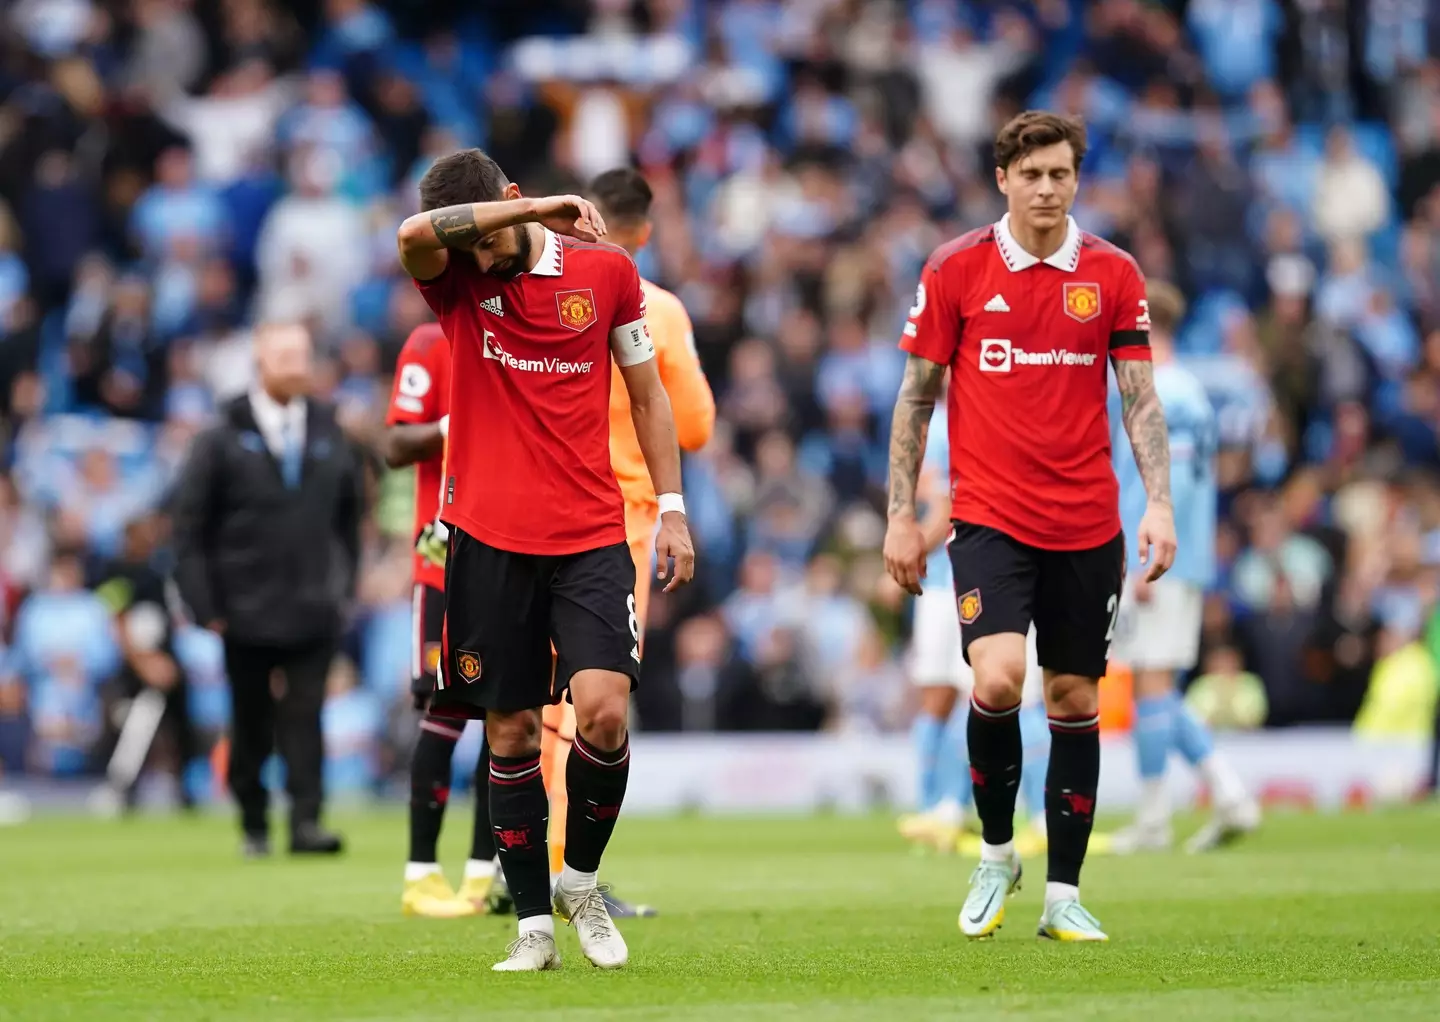 United's players were stunned after four wins on the bounce. (Image